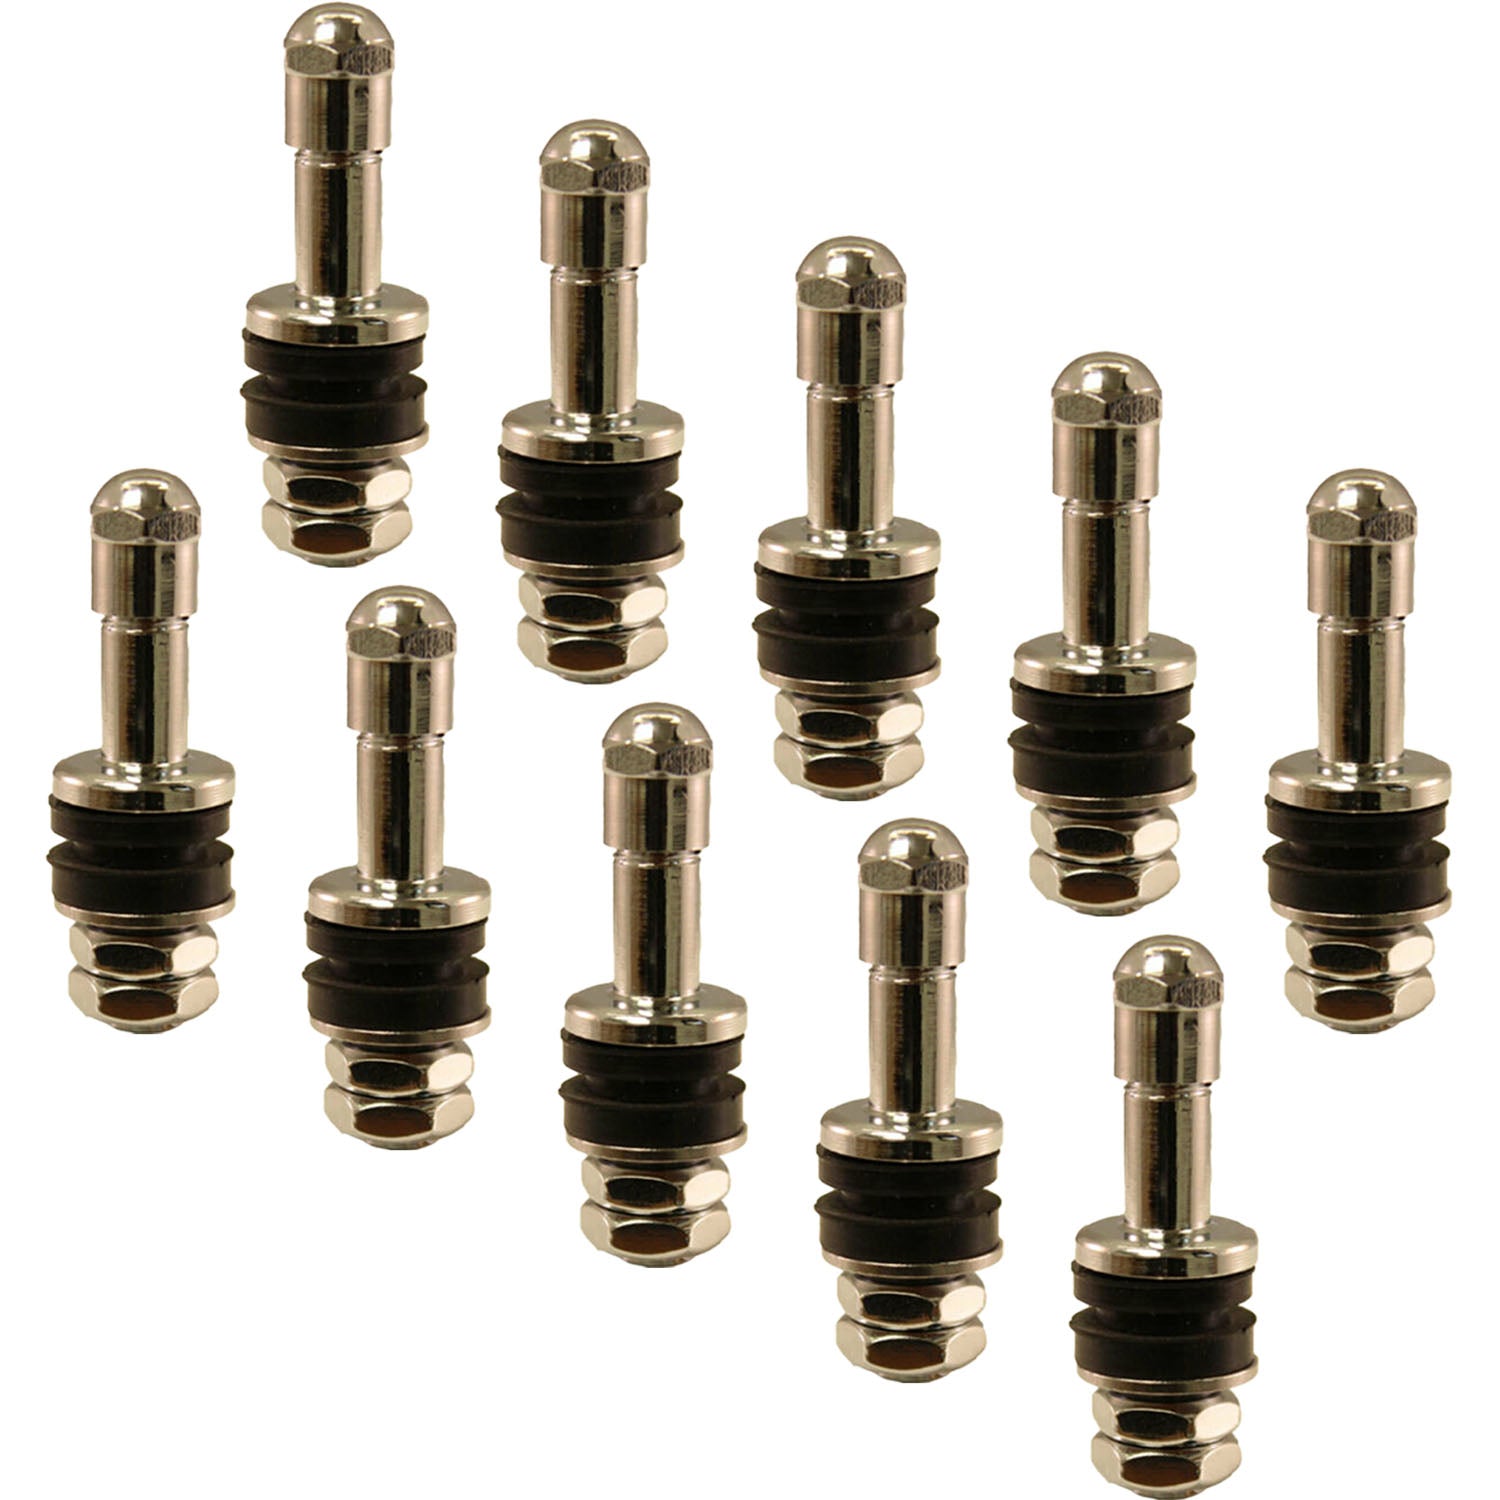 TV6030 Einky 1-1/4" High Performance No Show Chrome Plated Valve Stem Pack of 10